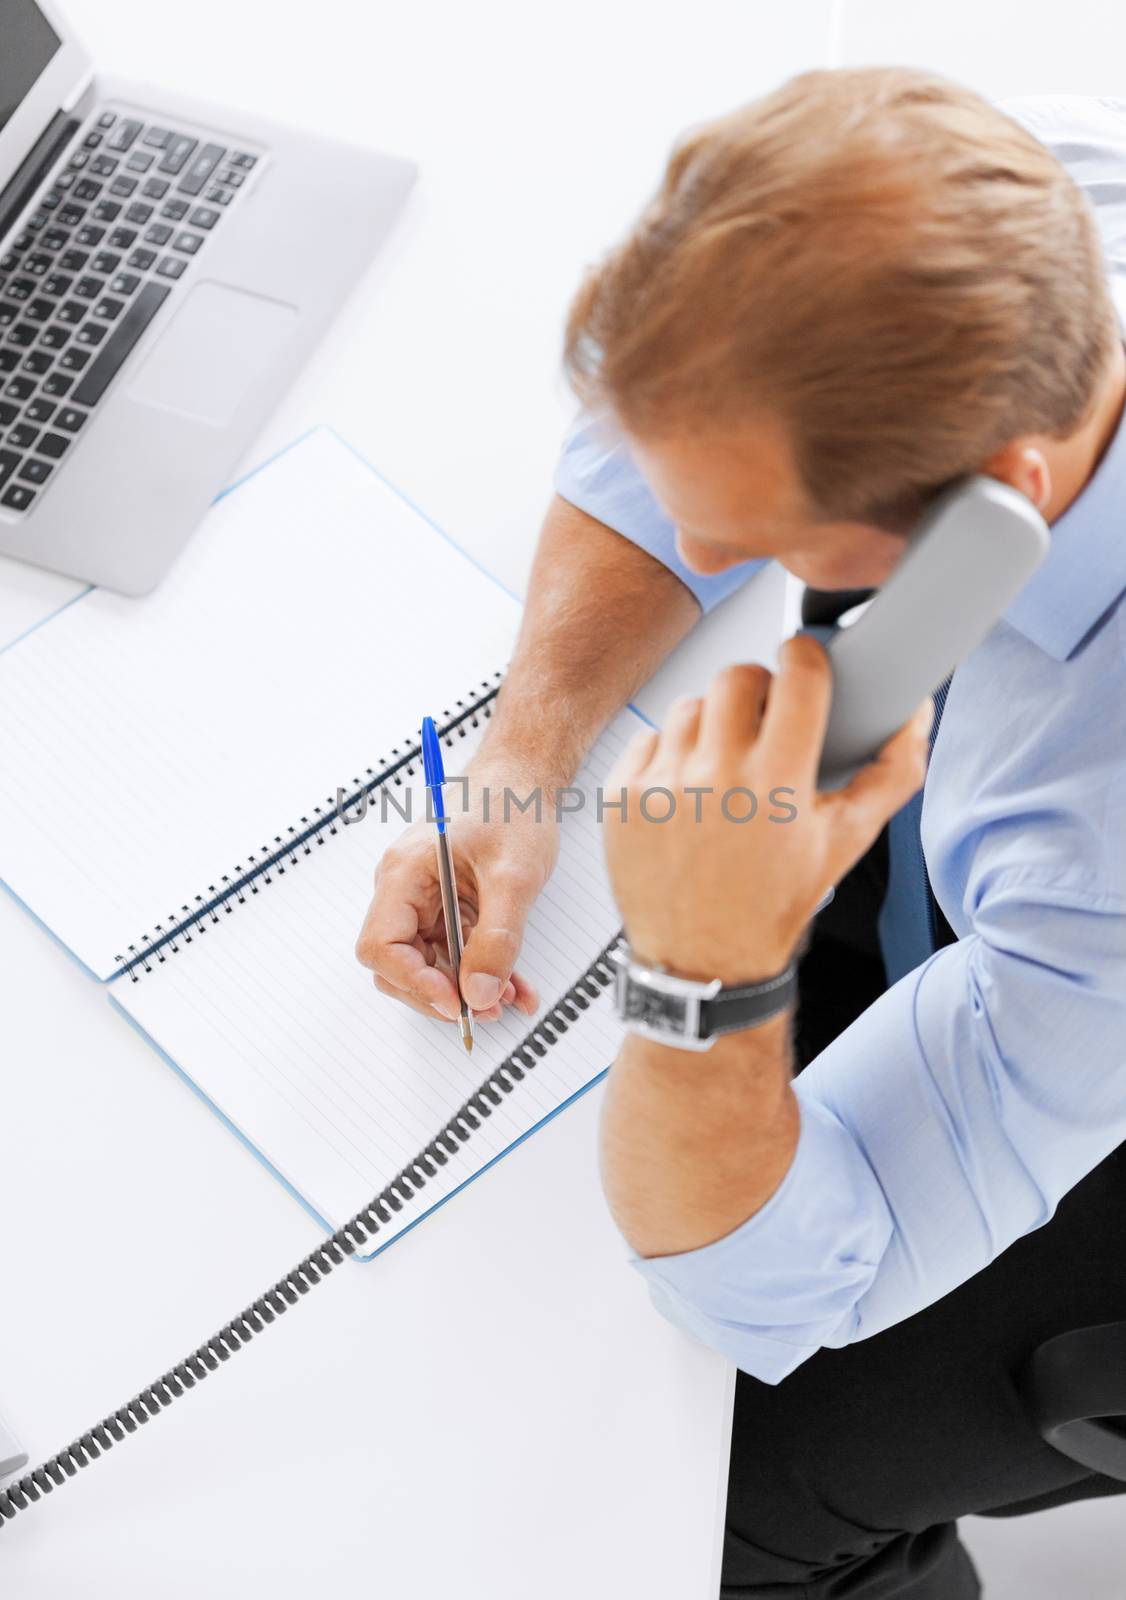 business, office, school and education concept - businessman talking on the phone